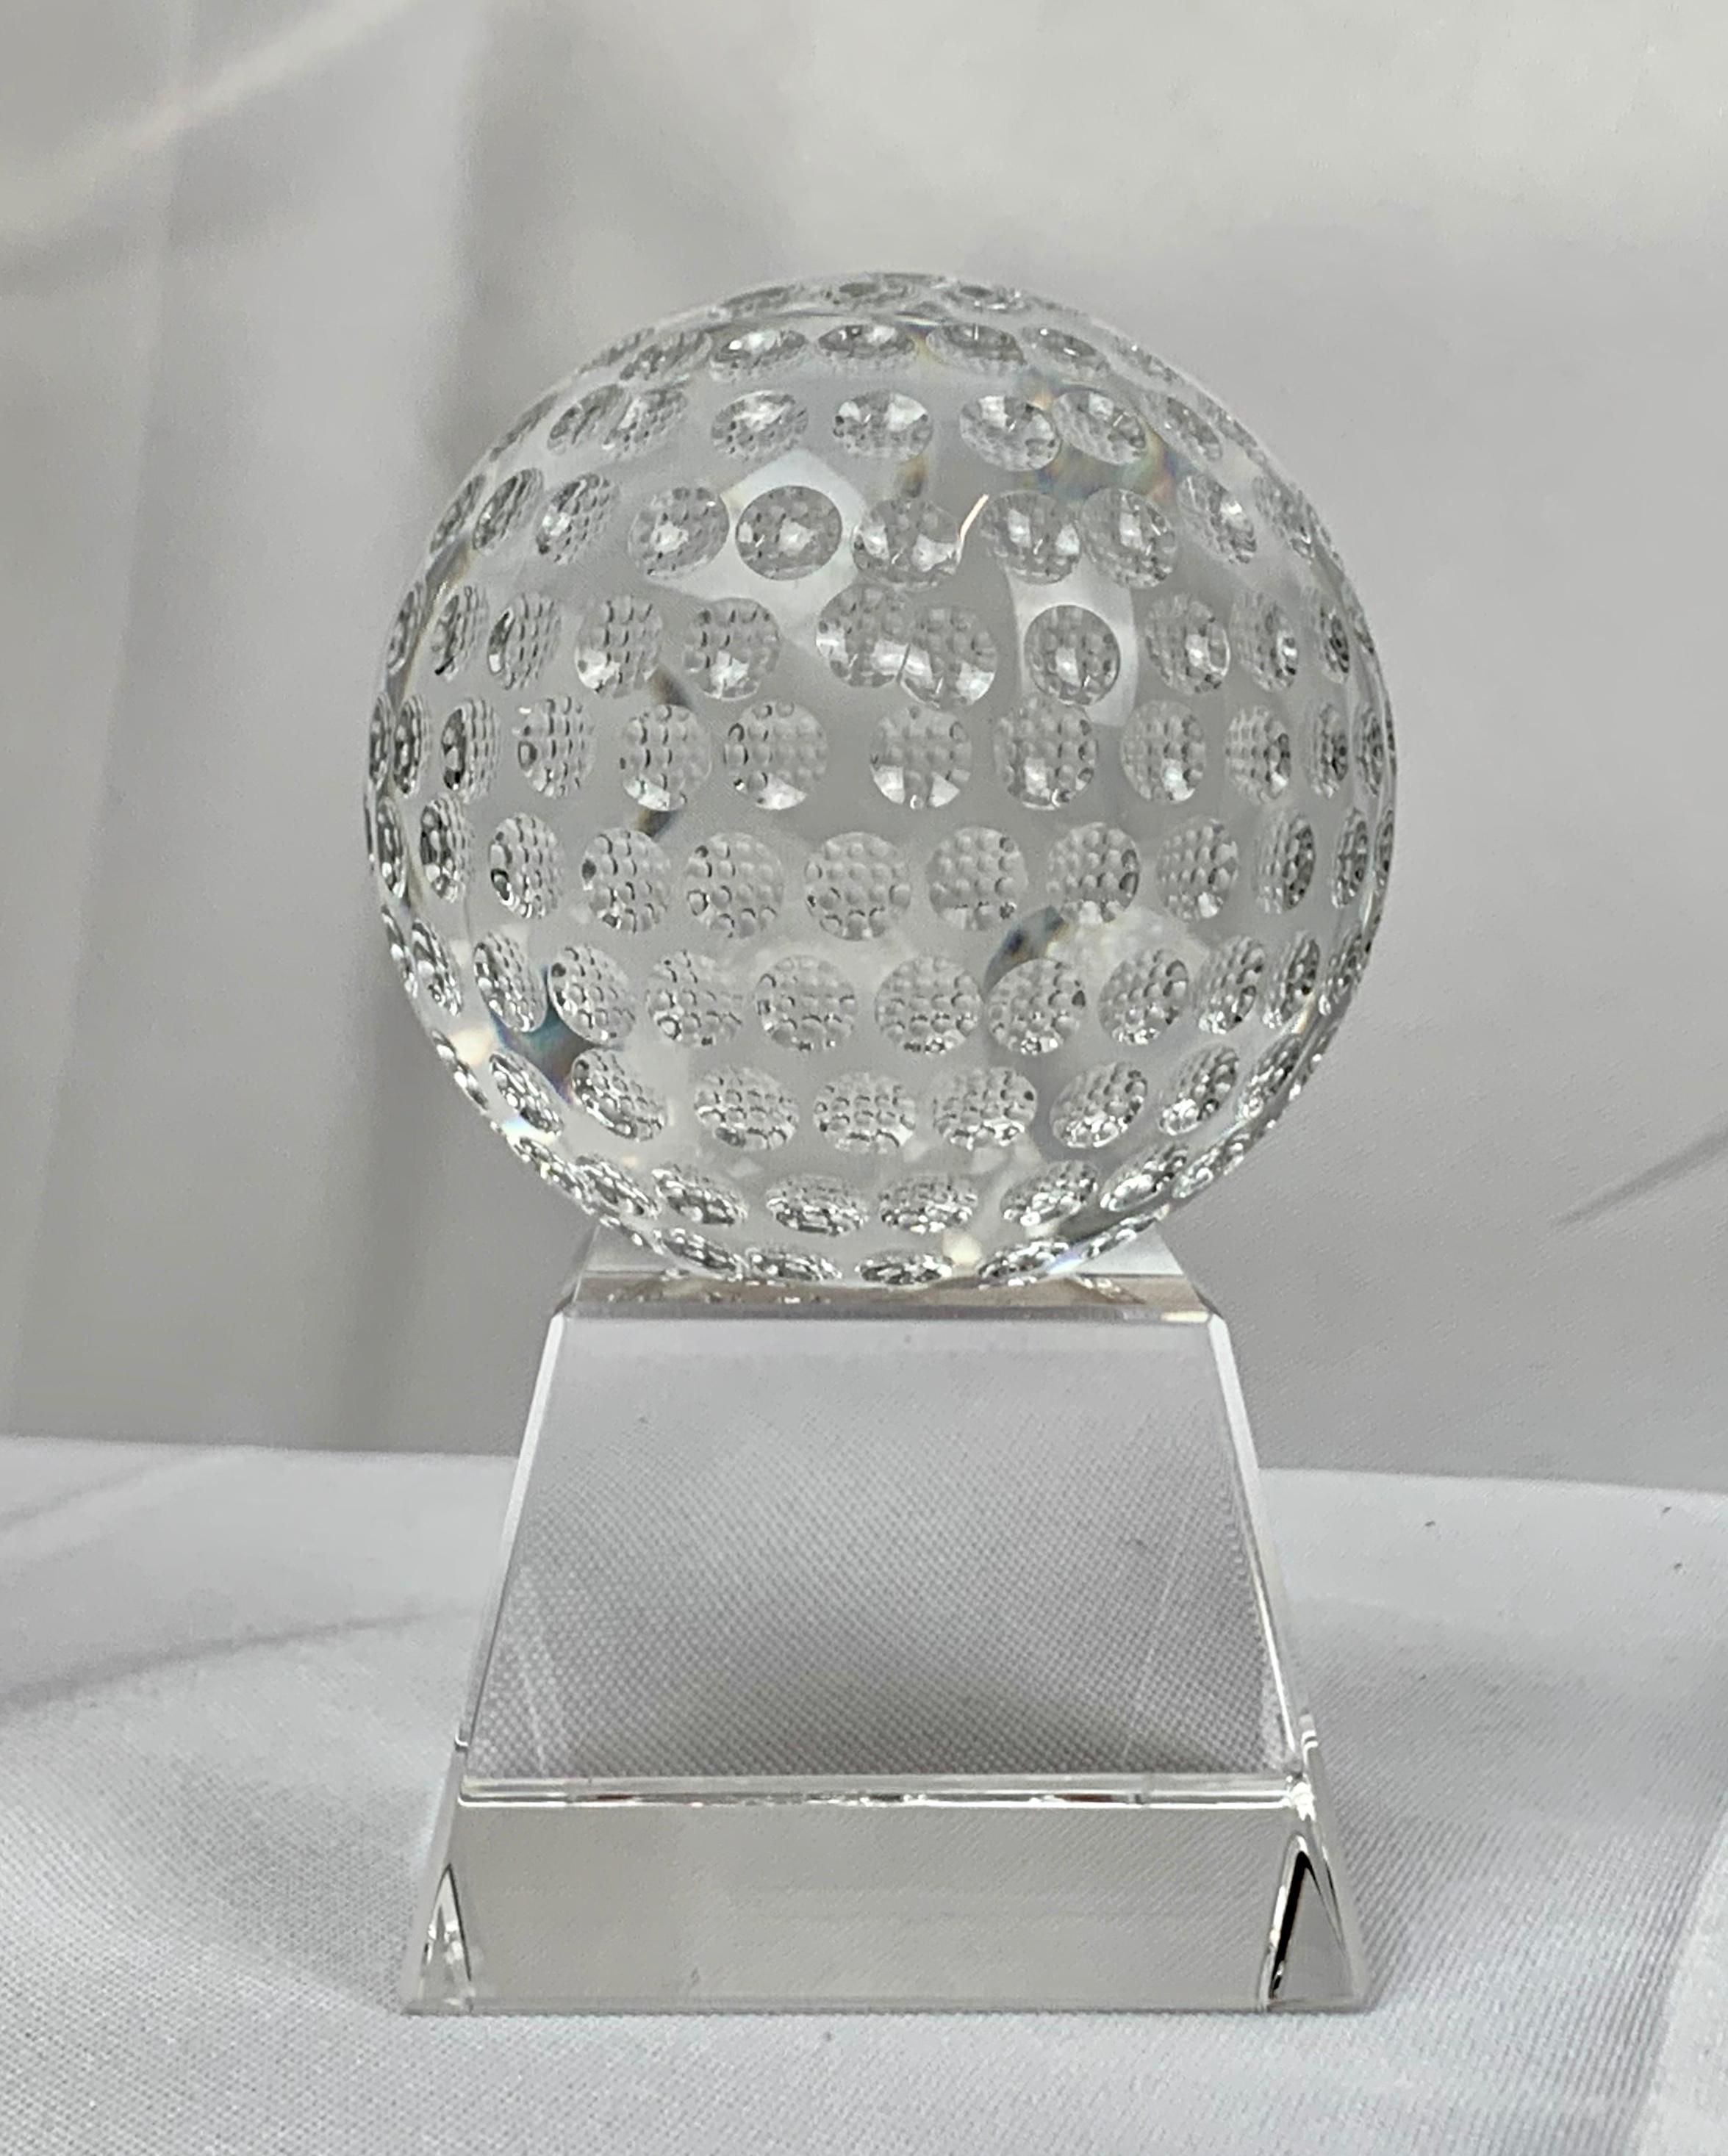 Two part handsome crystal golf ball on crystal stand having great clarity. Perfect gift for a golfer to be placed on a desk or shelf.
Measures: H-3 7/8